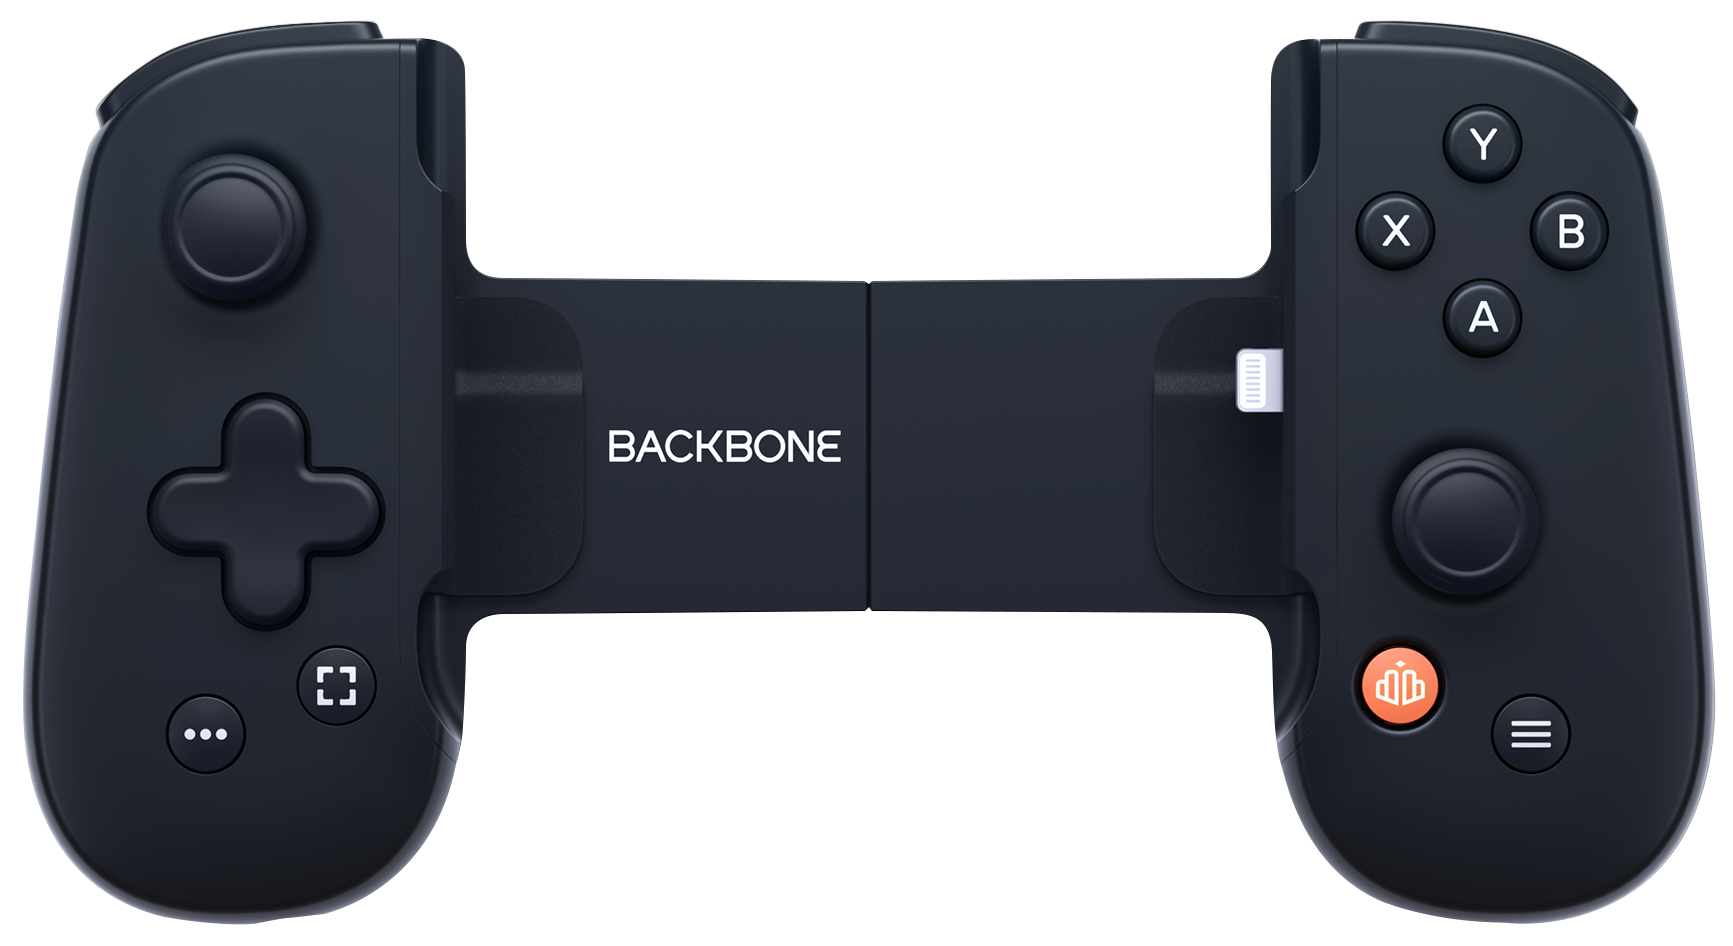 Backbone One Controller for iPhone